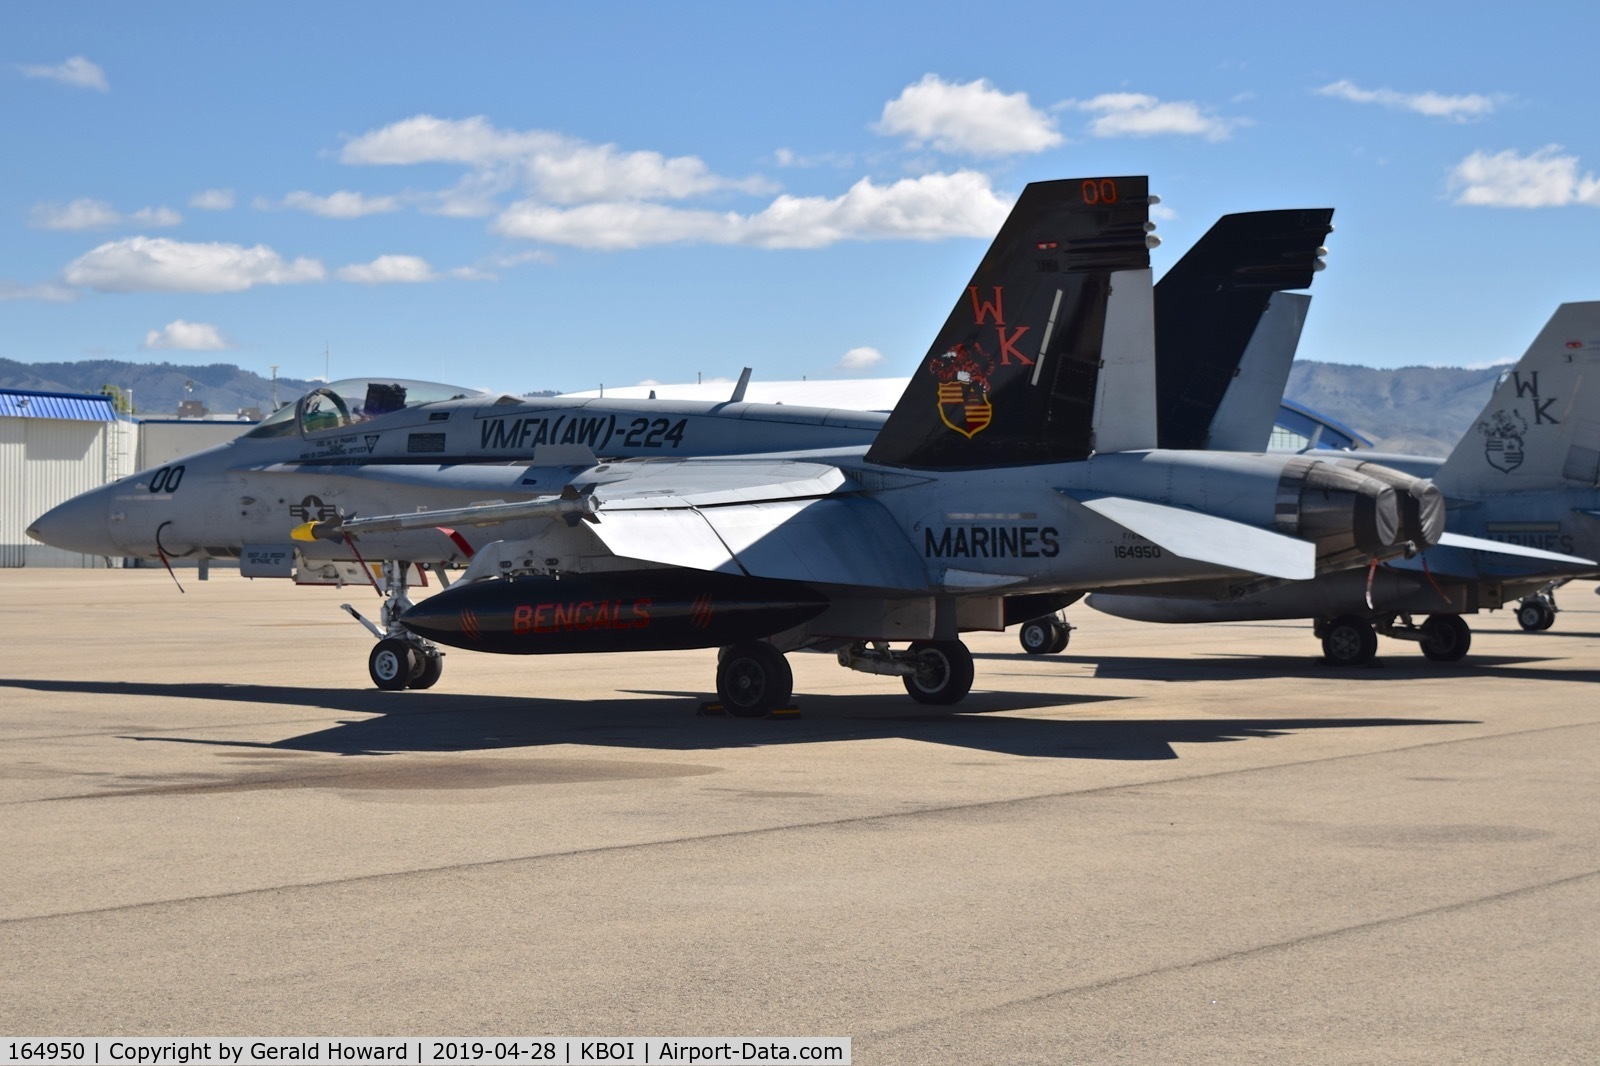 164950, McDonnell Douglas F/A-18C Hornet C/N 1250/C374, WK-00 parked on the north GA ramp.  VMFA(AW)-224 